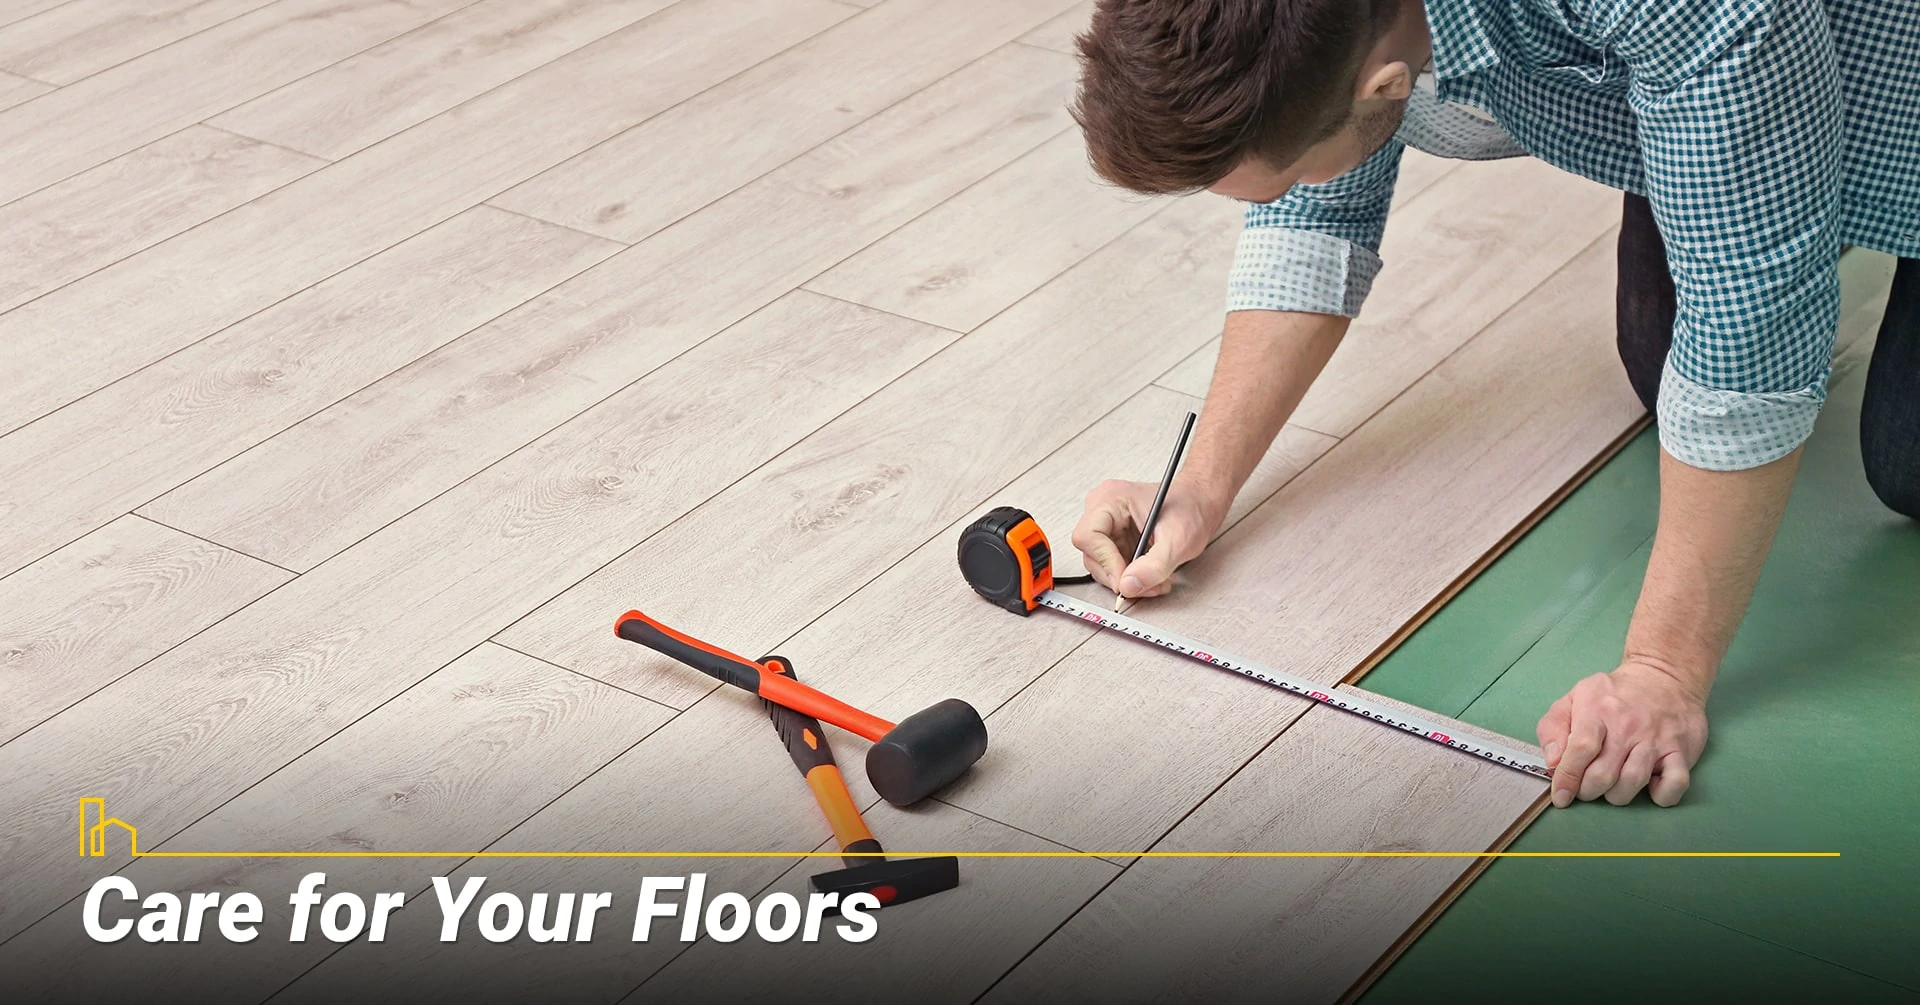 Care for Your Floors, maintain your floors